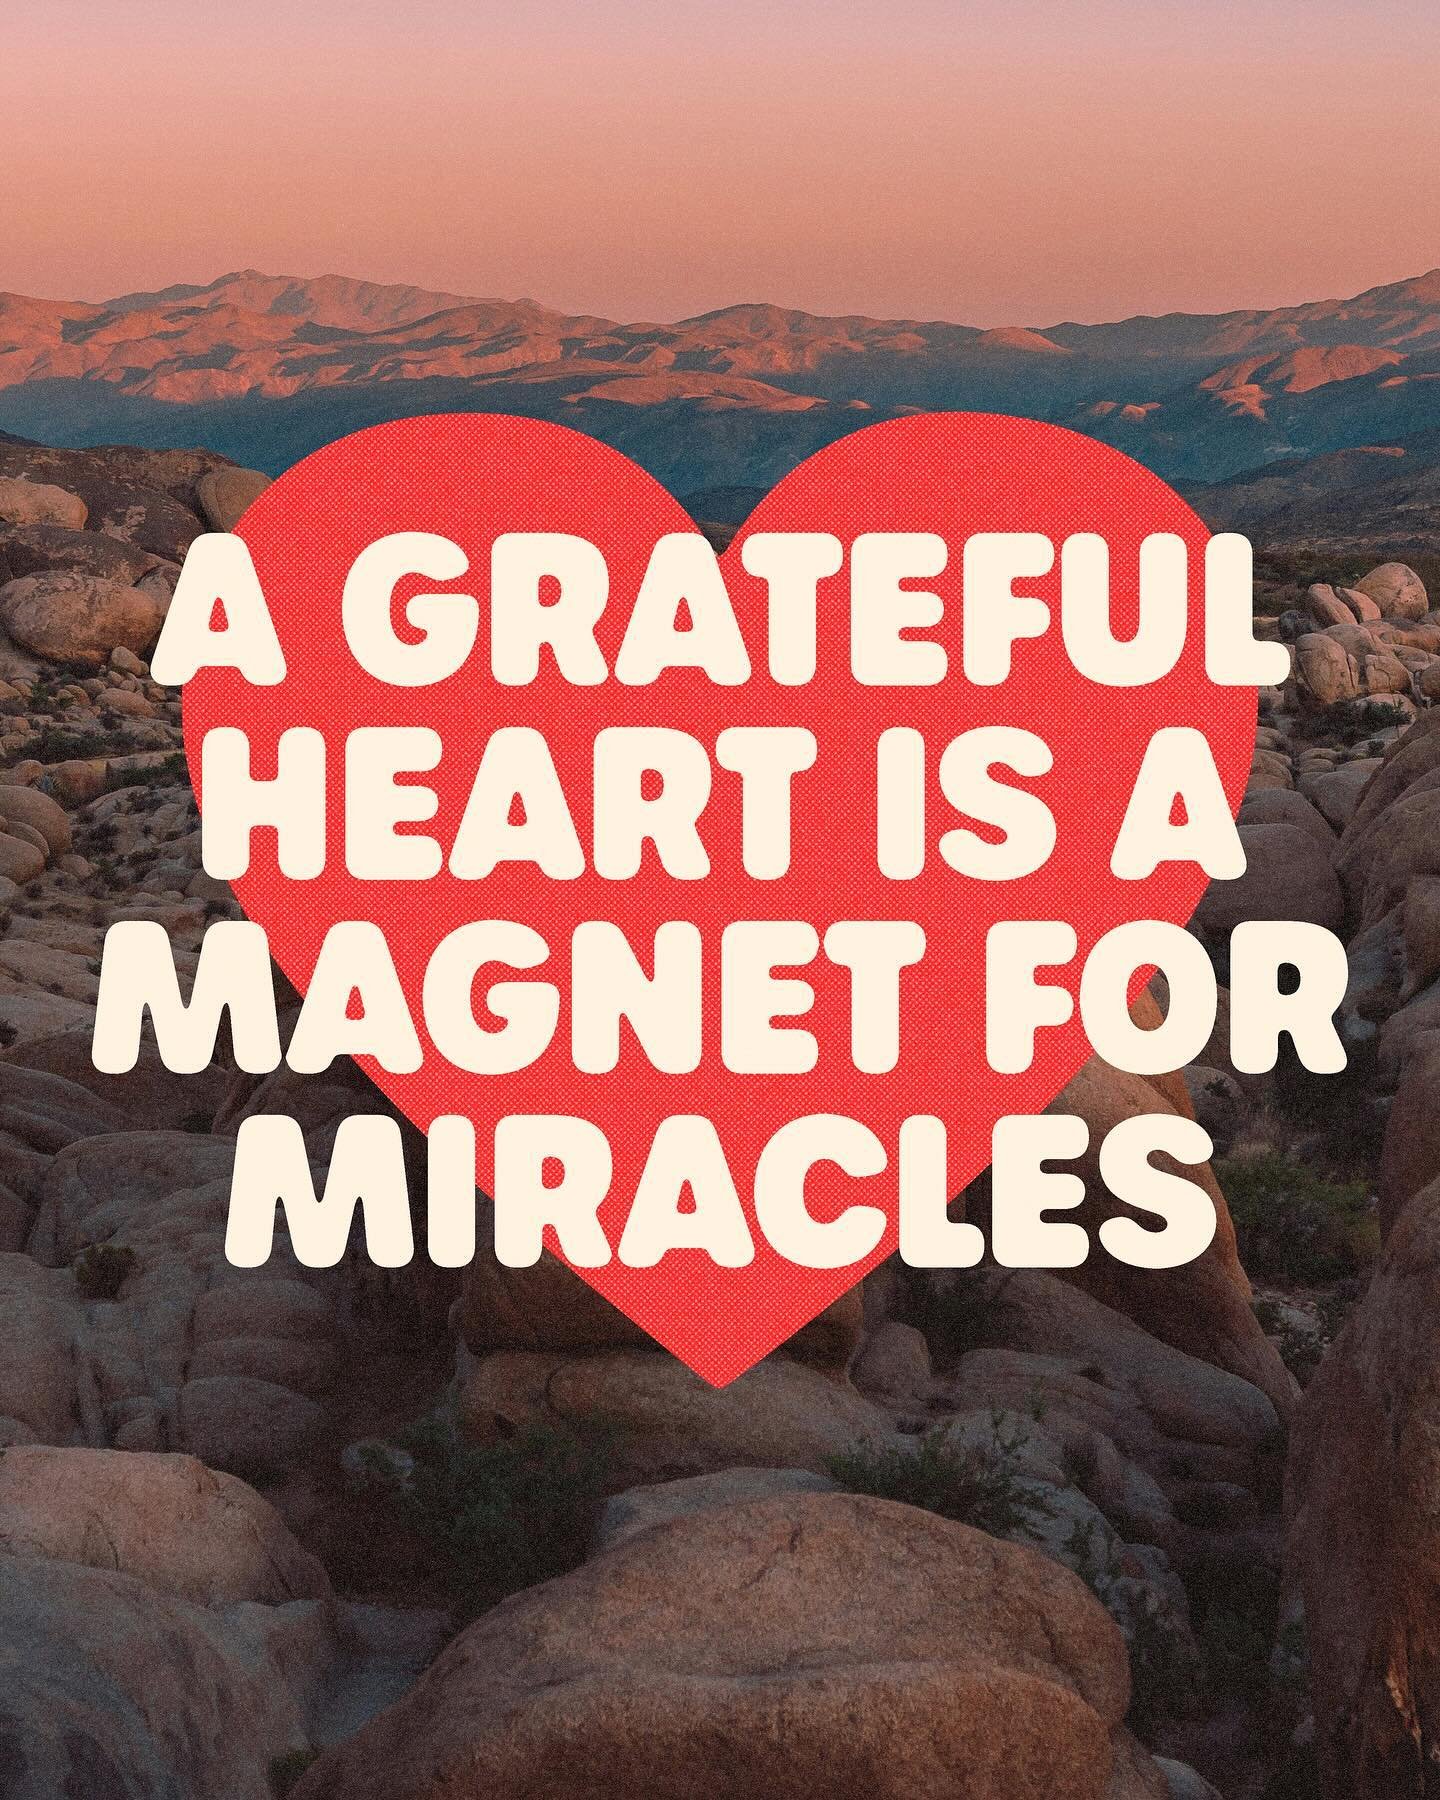 Don&rsquo;t just thank God when He does the miraculous, thank God before he does the miraculous! A grateful heart is a magnet for miracles 💛
&bull;
Swipe to see alternatives and process ➡️